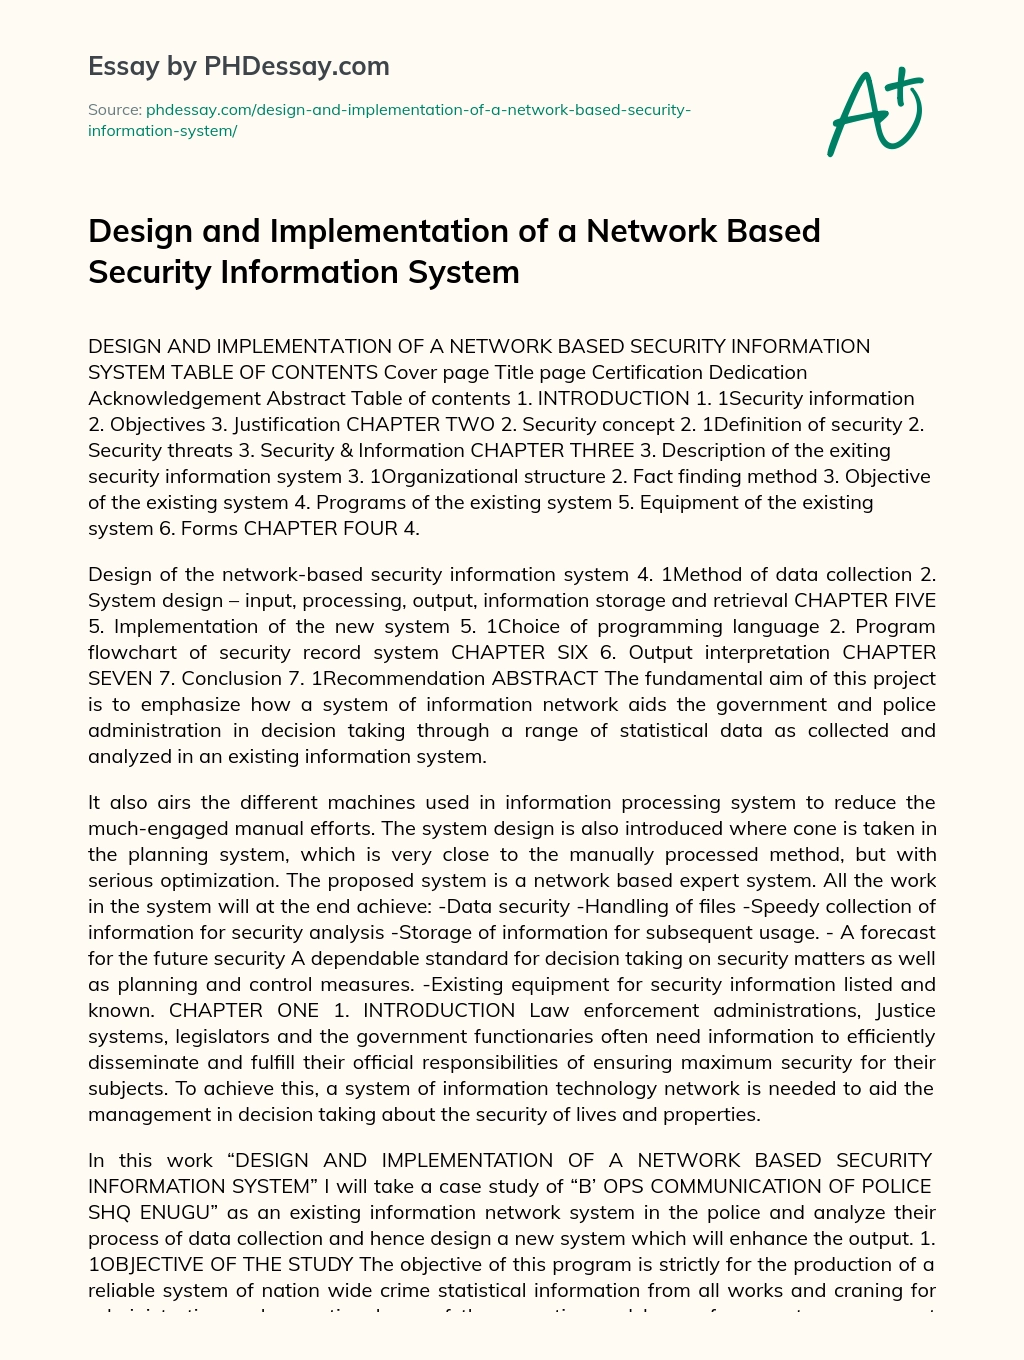 Design and Implementation of a Network Based Security Information System essay